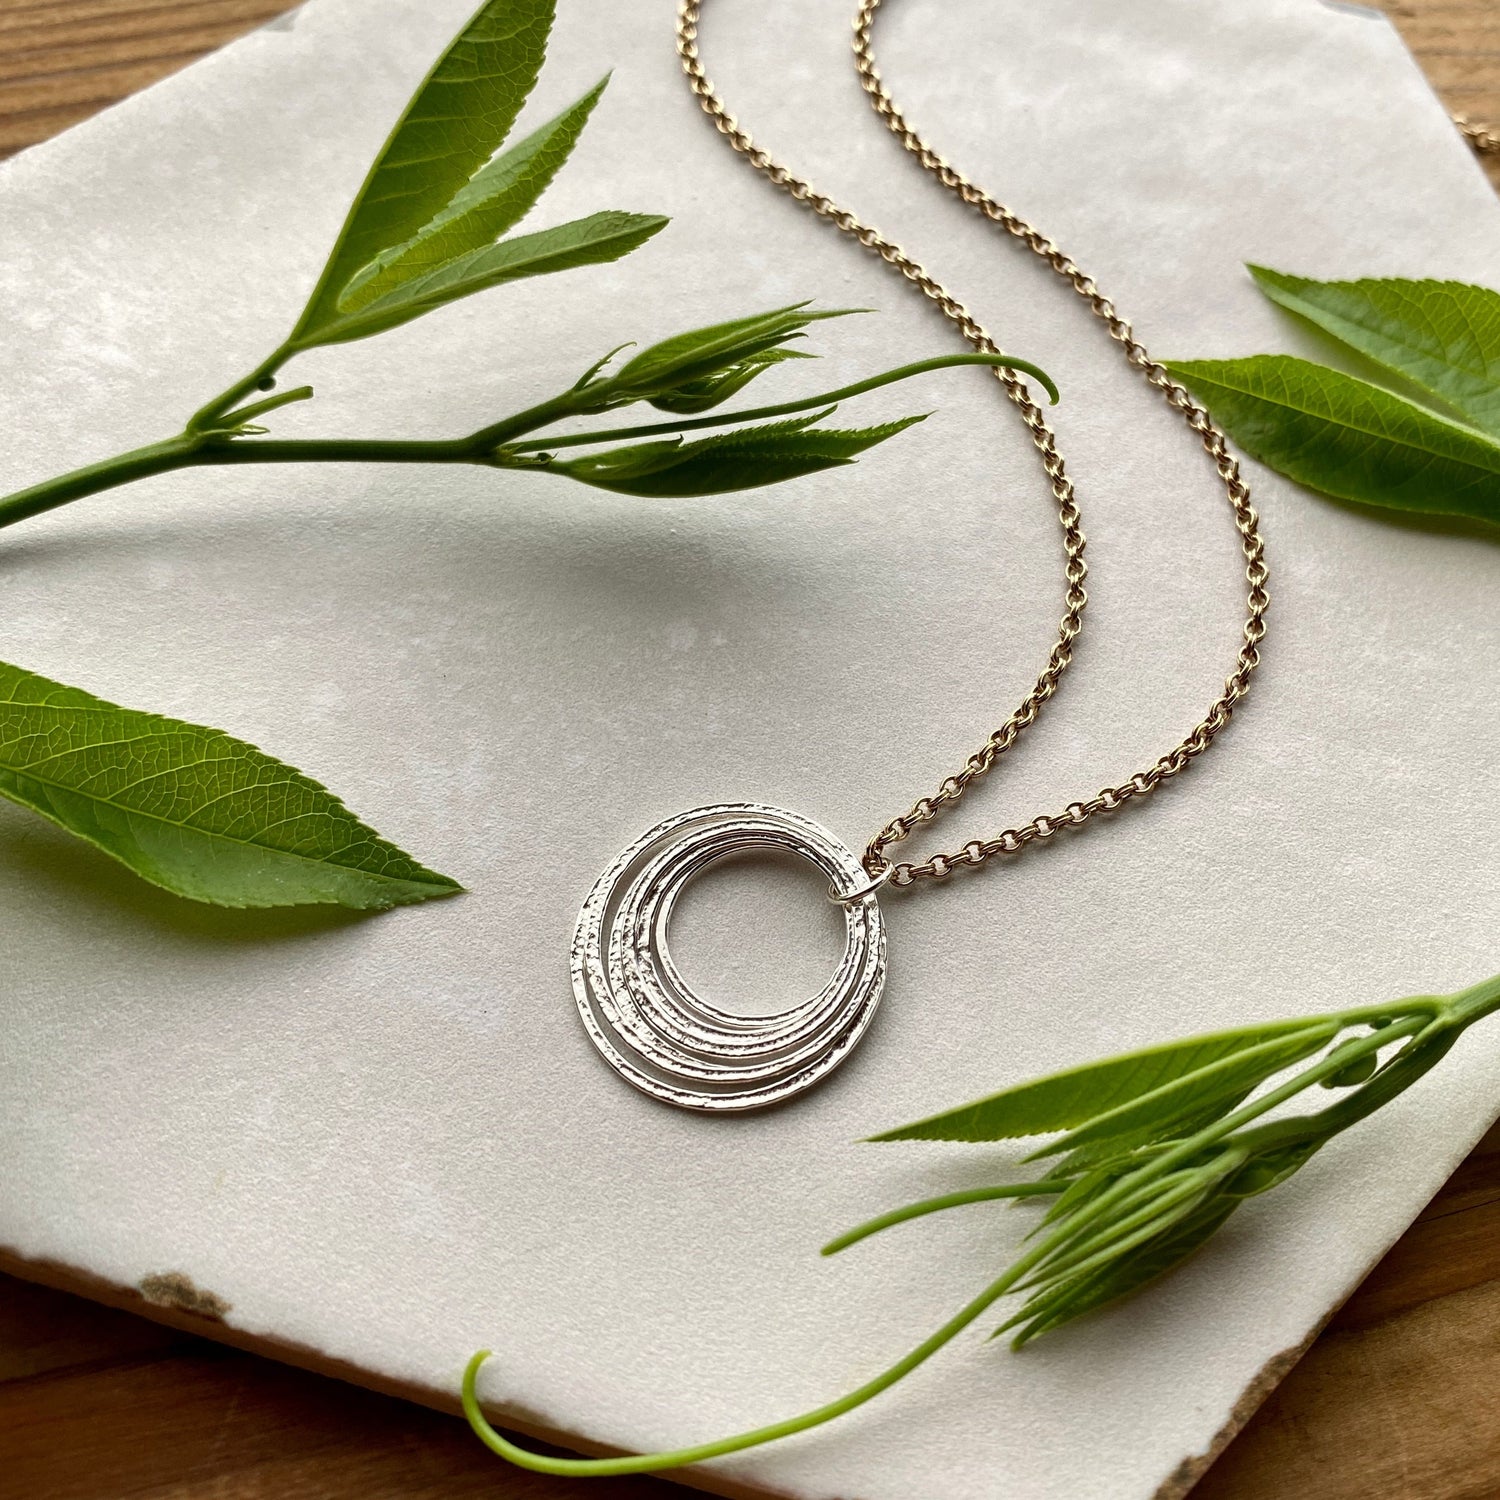 Six Circle 60th Minimalist Mixed Metal Milestone Birthday Necklace, 6 Rings for 6 Decades Handcrafted Perfectly Imperfect 6 Circle Pendant